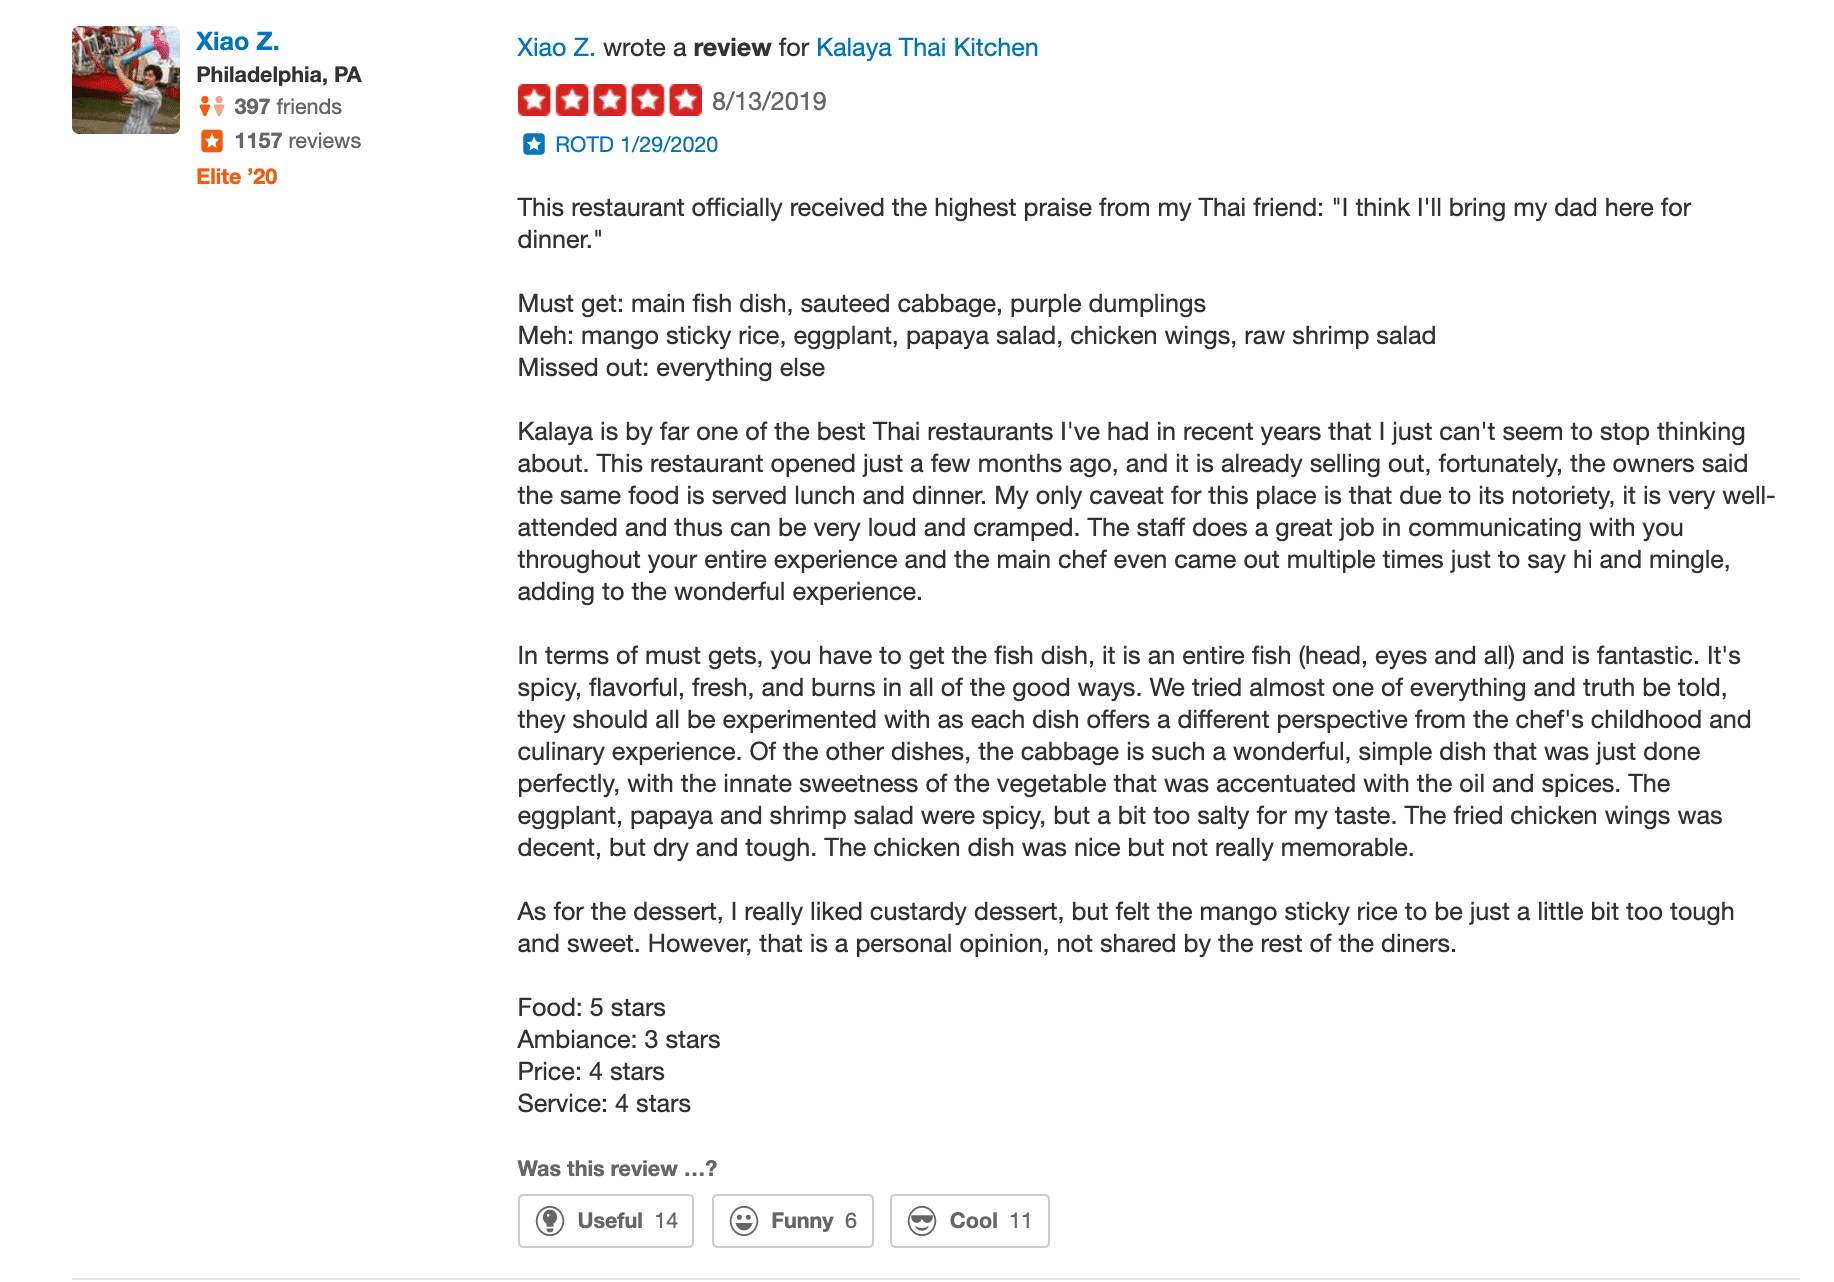 Positive follow-up review from a customer